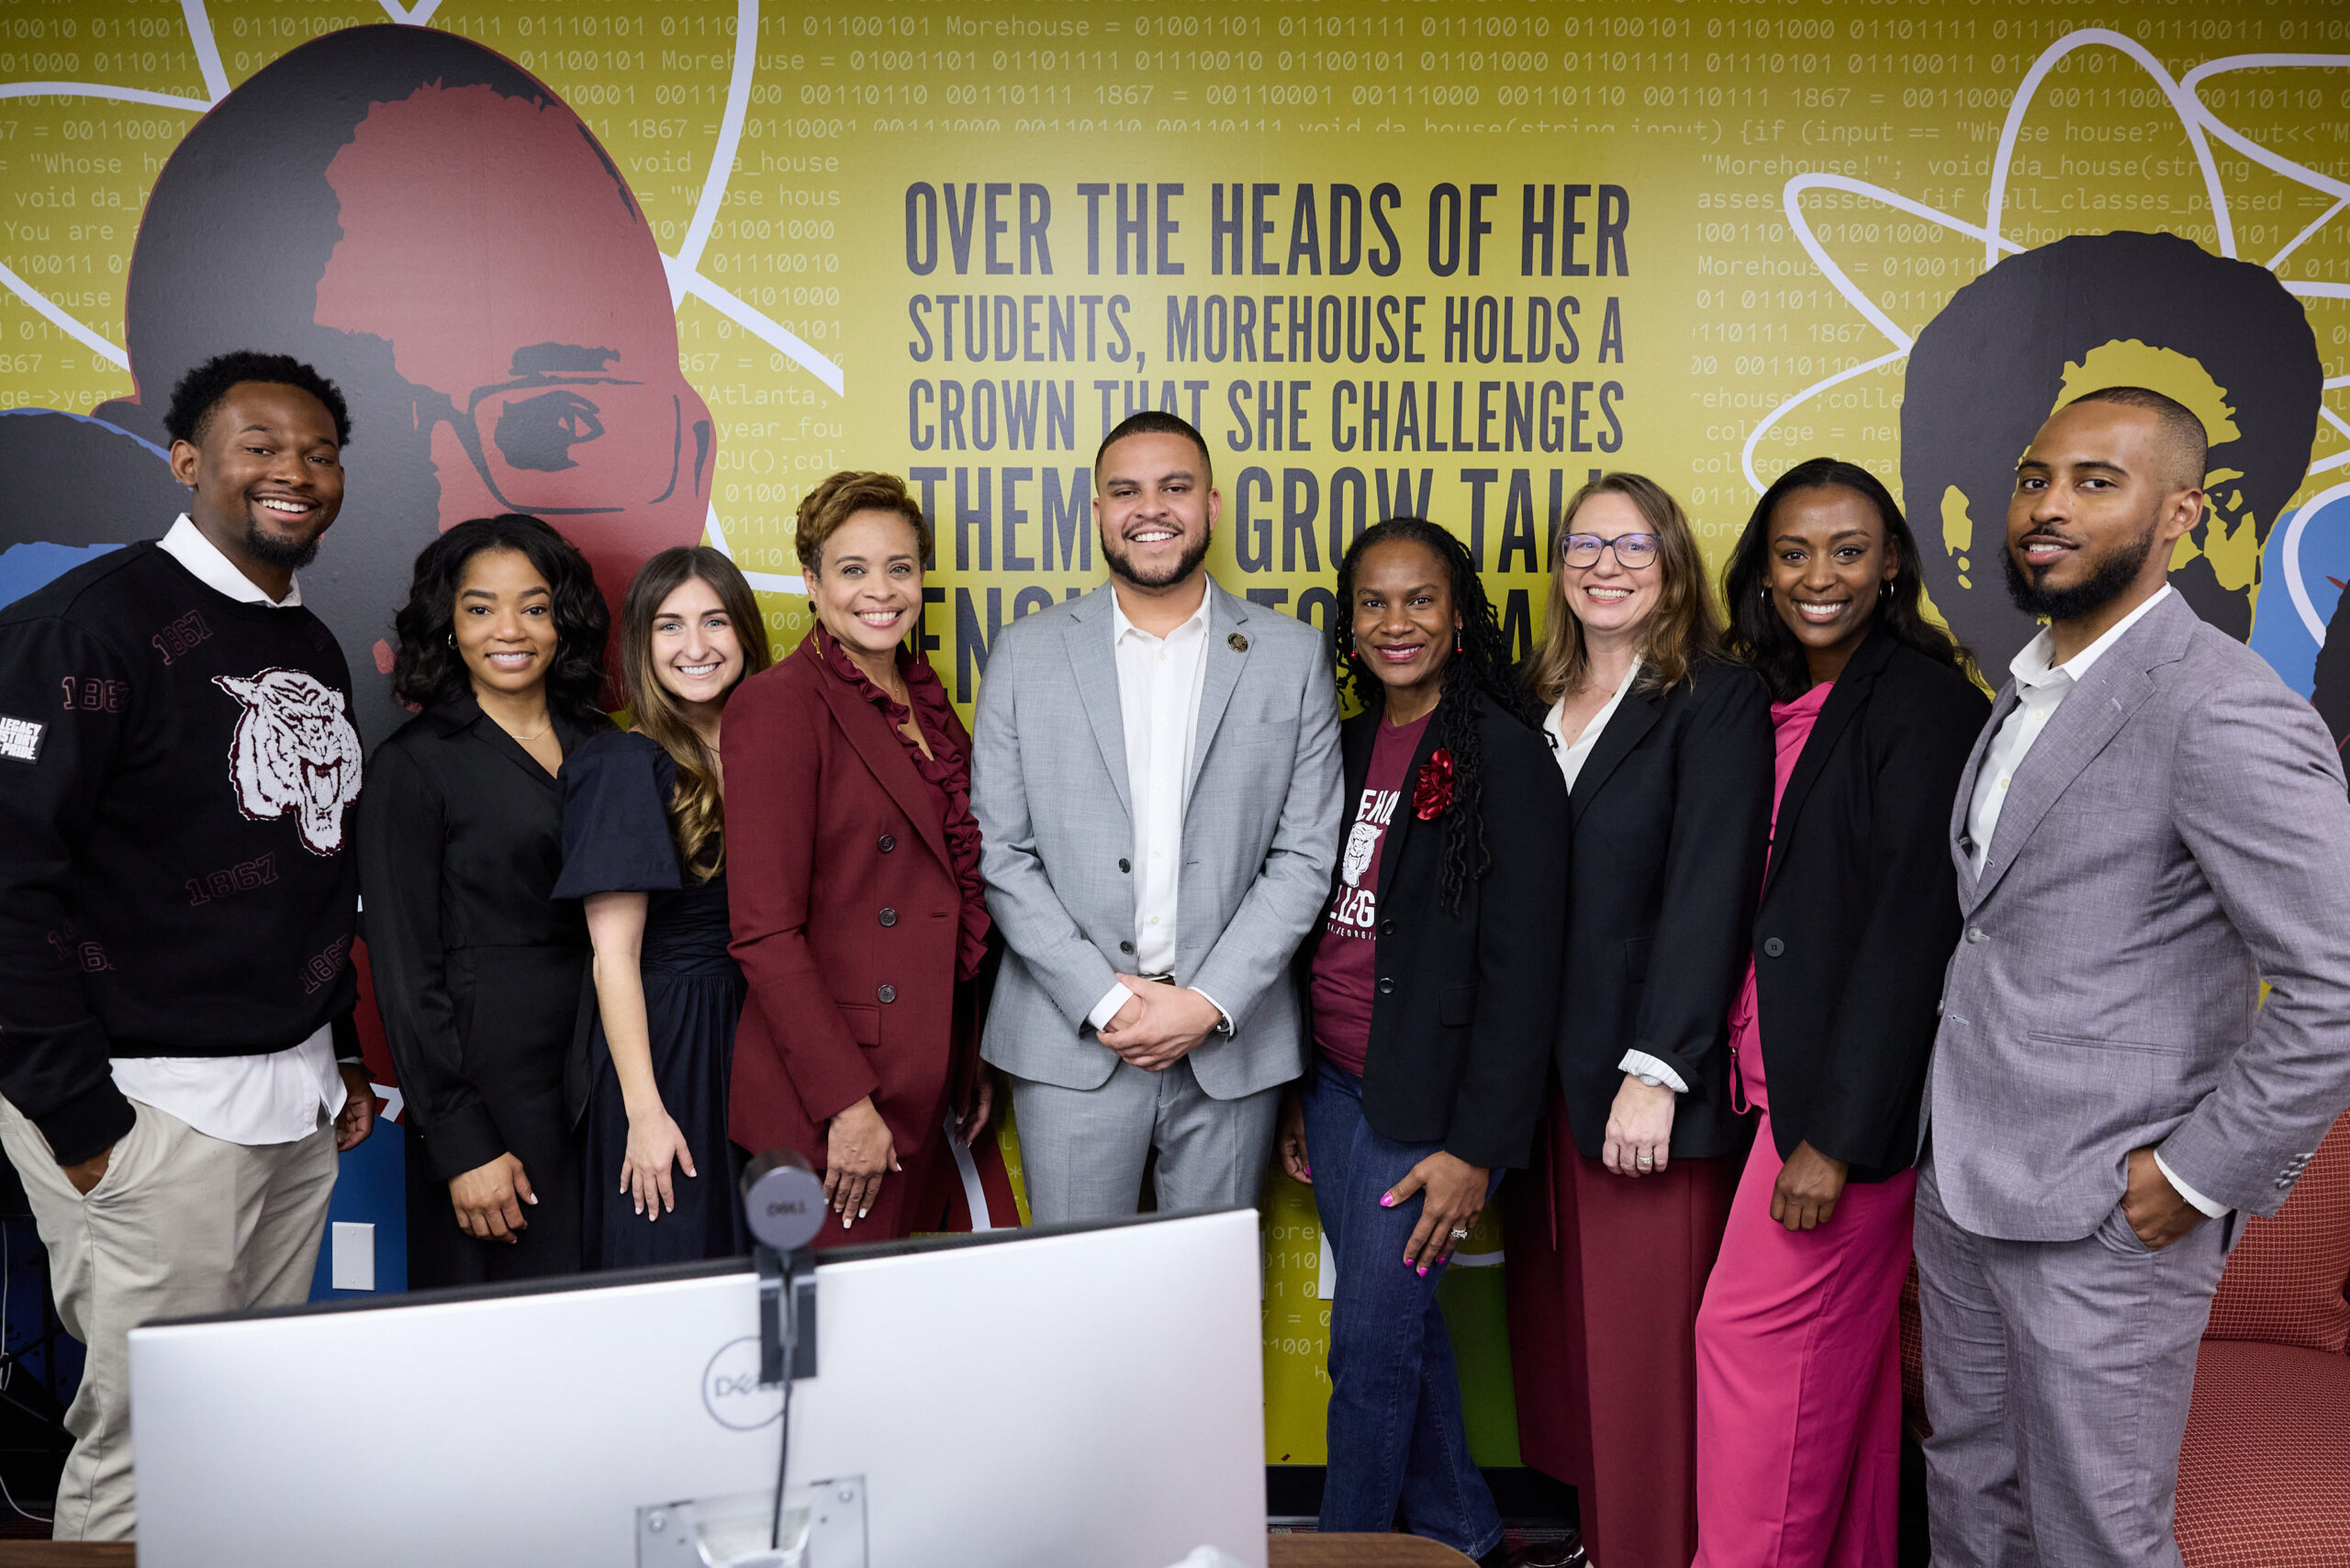 Exclusive: Google furthers its mission of tech diversity with new classroom annex at Morehouse